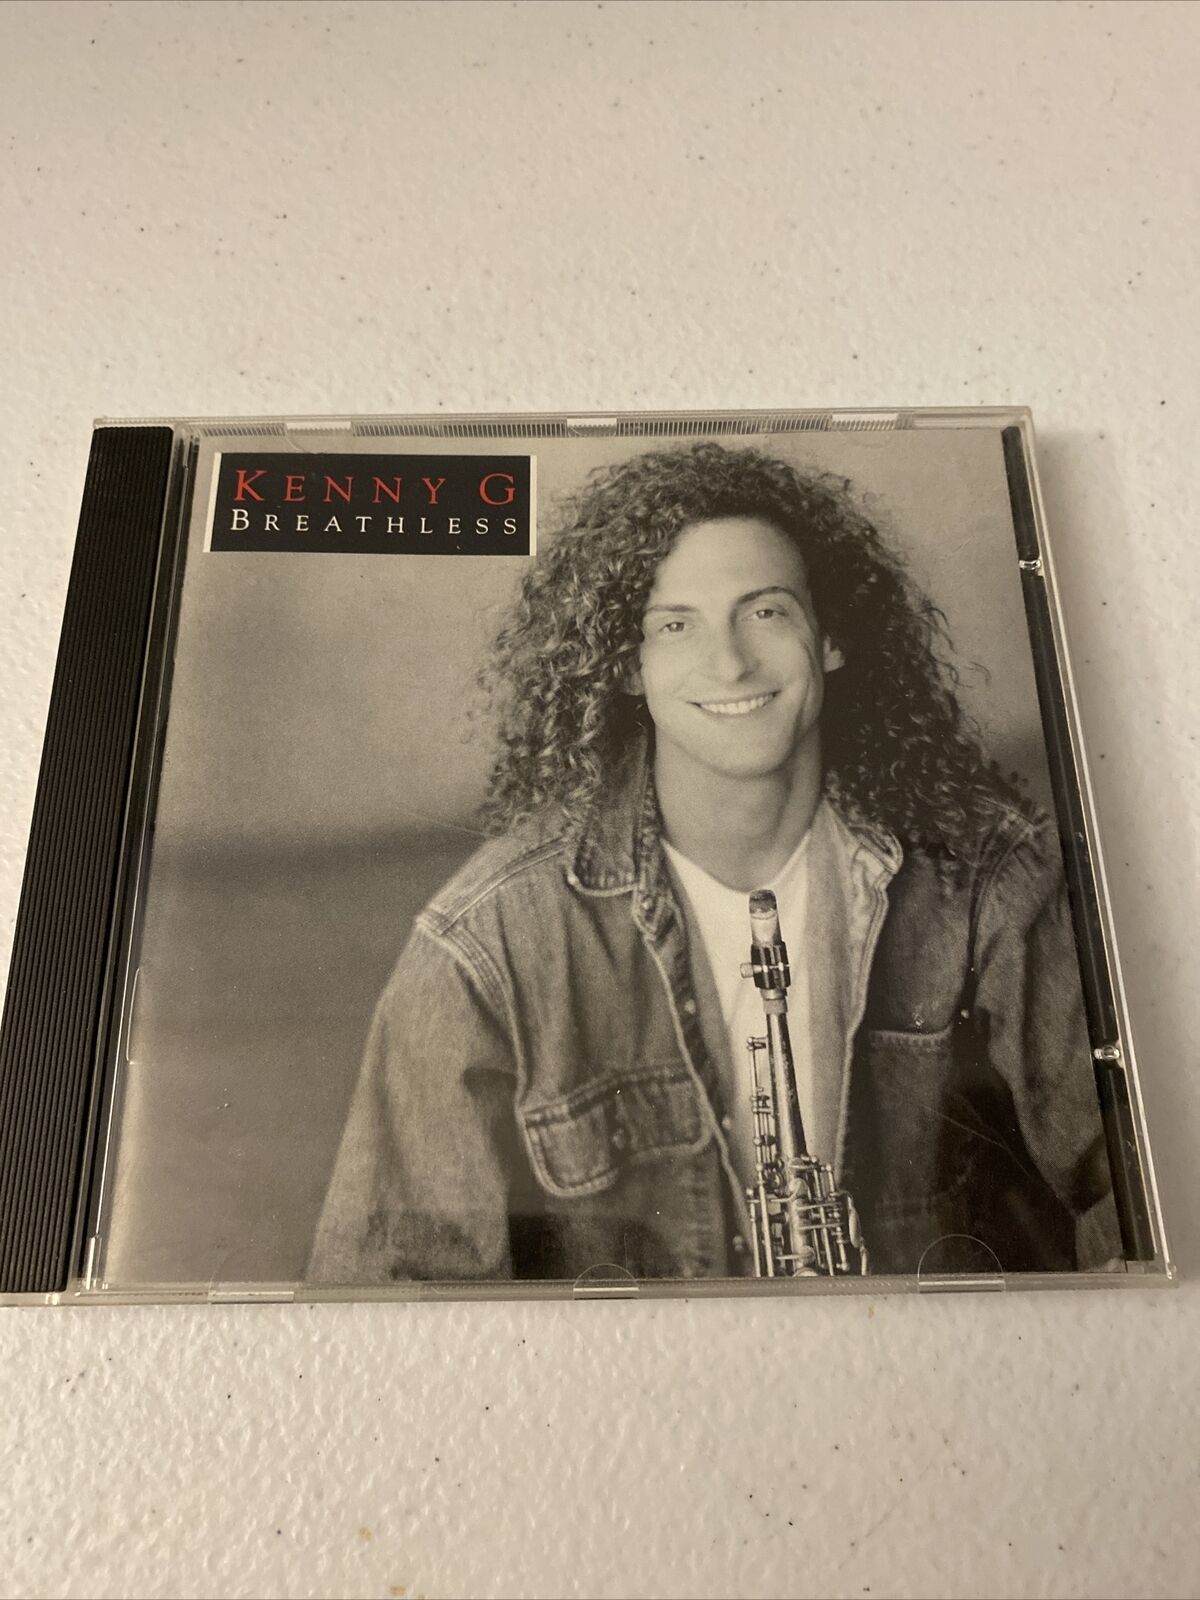 Breathless - Audio CD By Kenny G